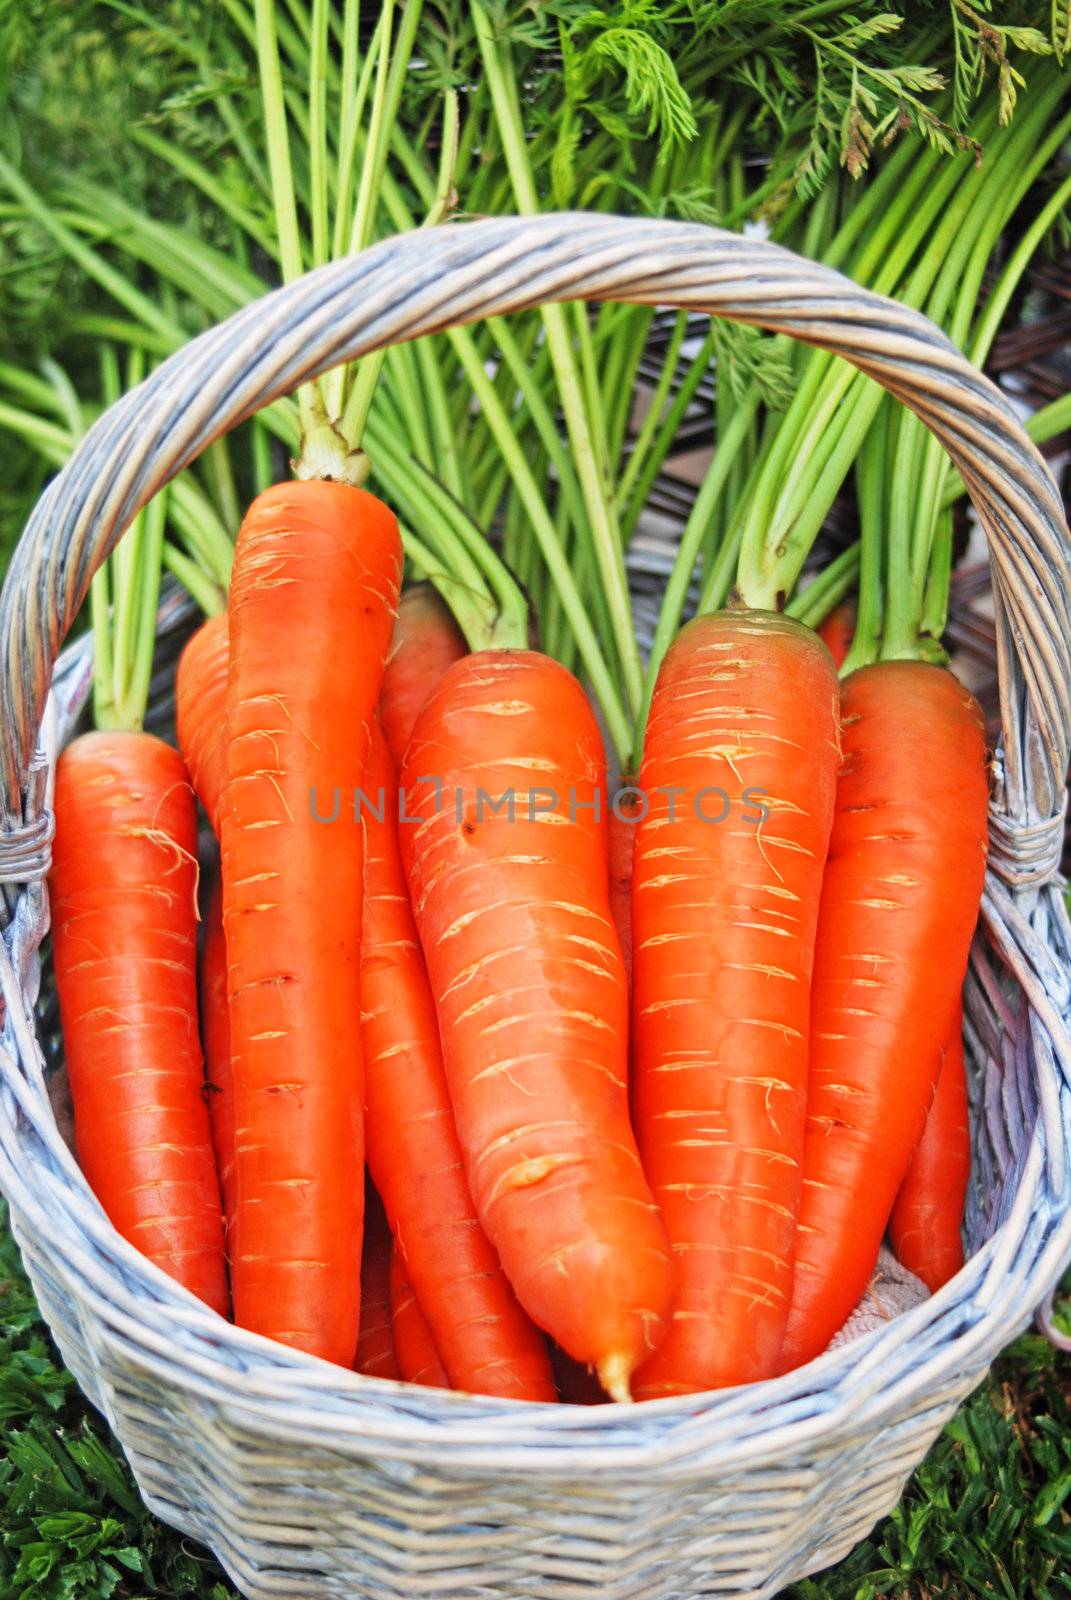 carrots - fresh and healthy by tish1